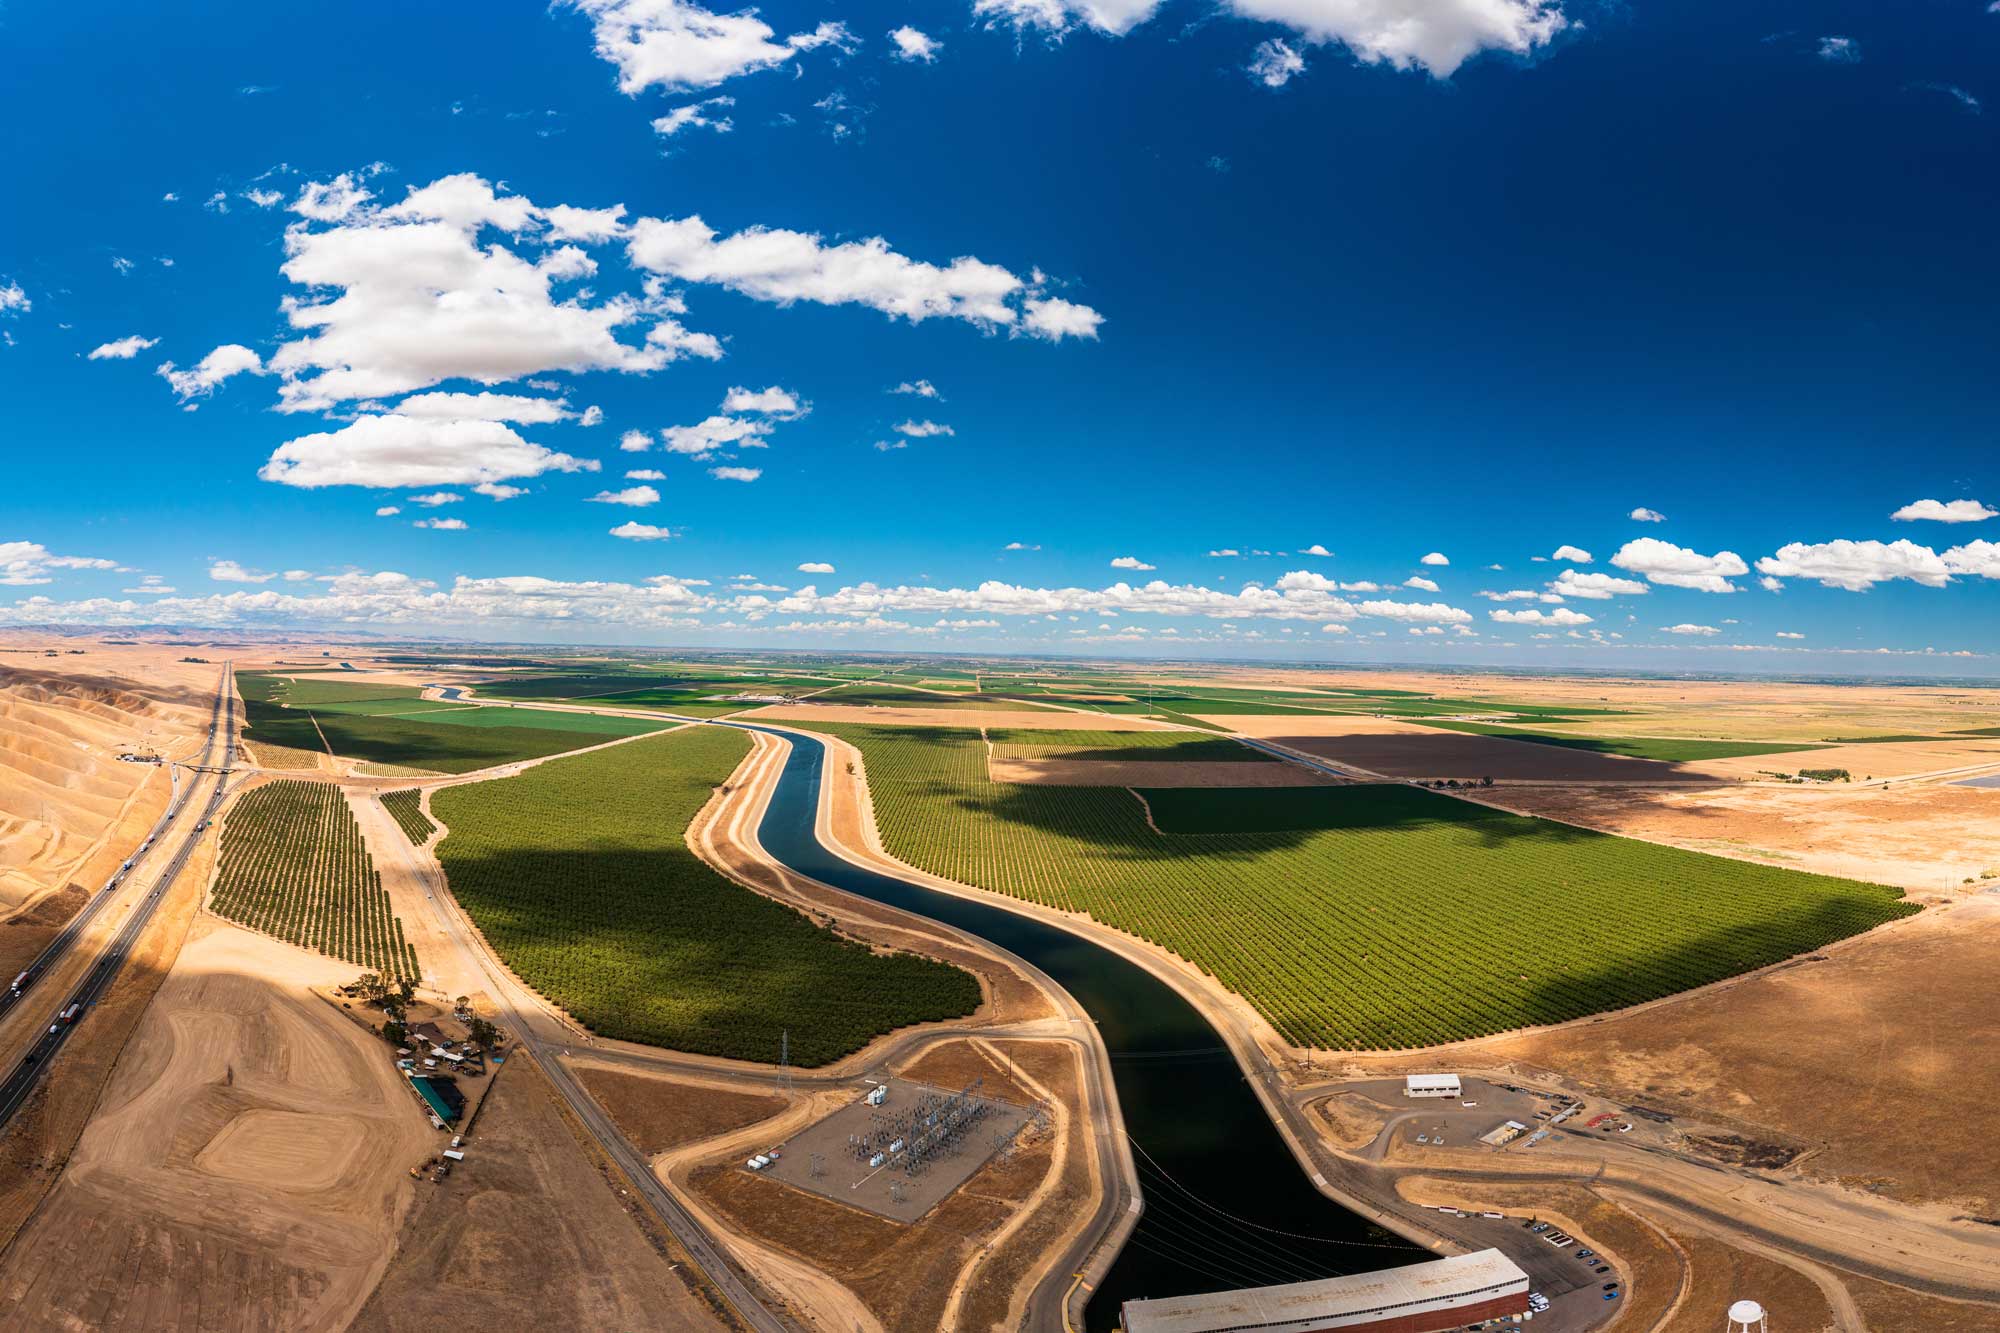 photo - California Aqueduct in the Central Valley near Tracy, California